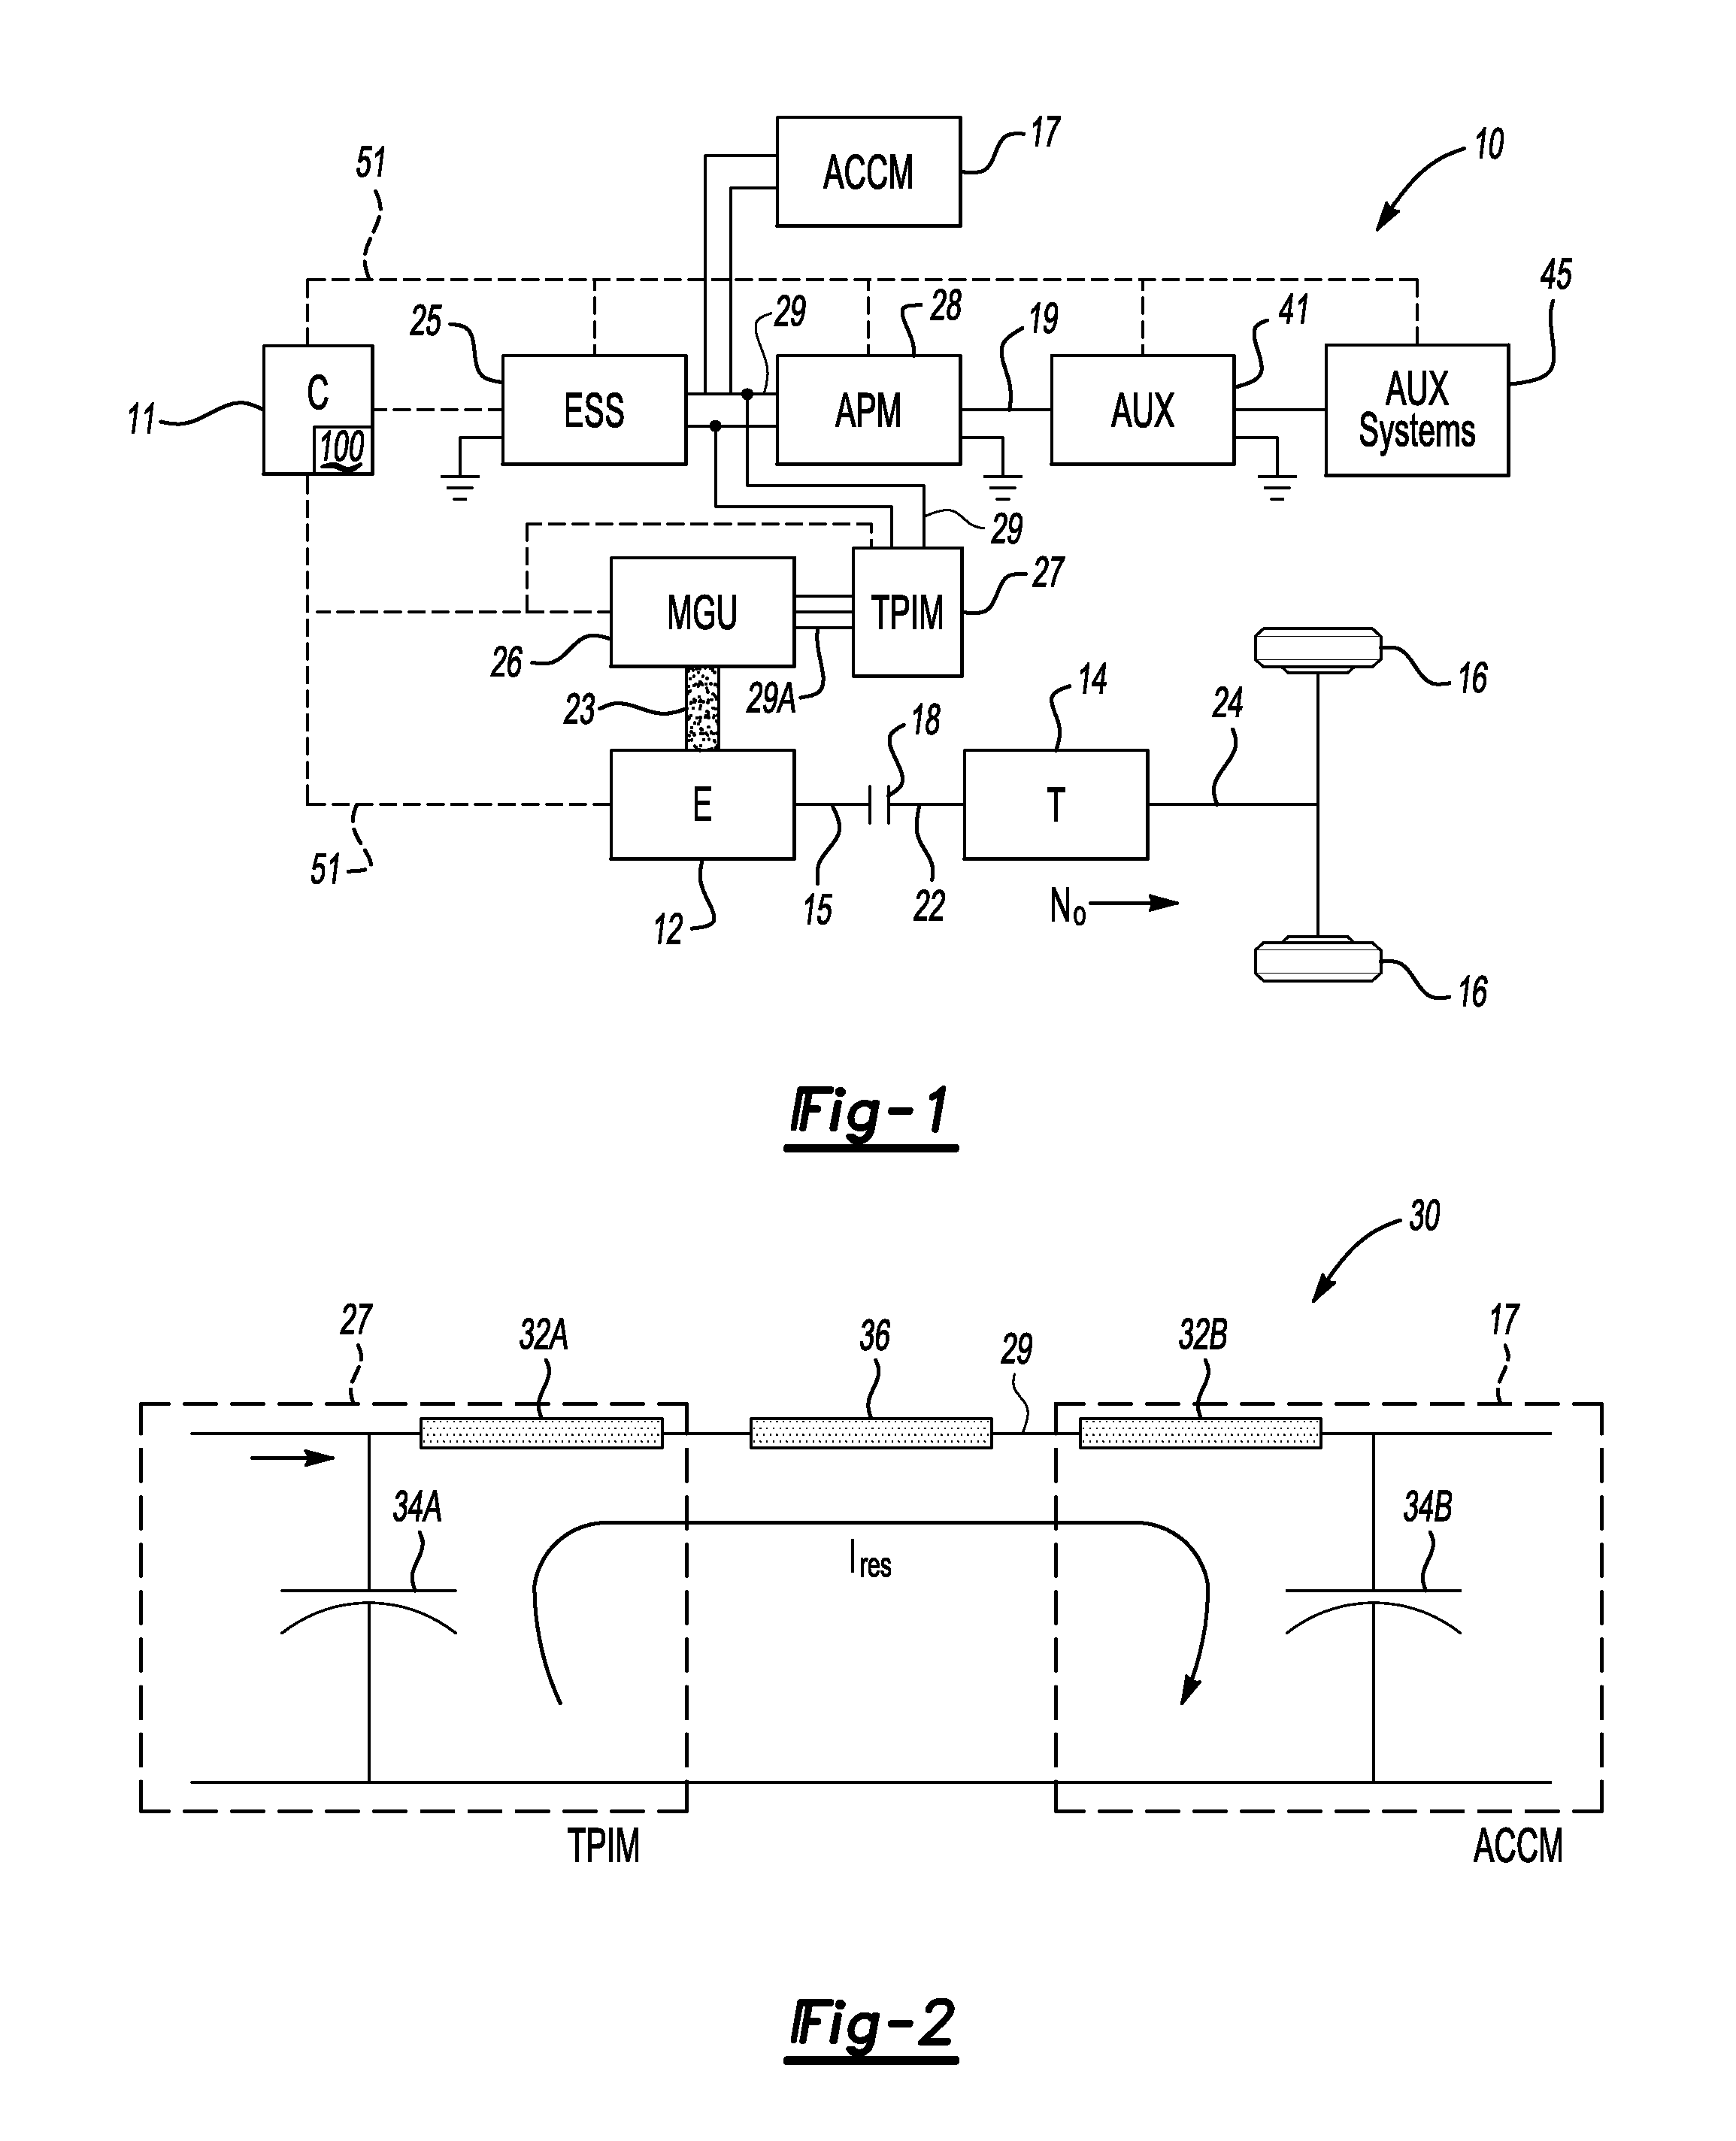 Method and apparatus for avoiding electrical resonance in a vehicle having a shared high-voltage bus